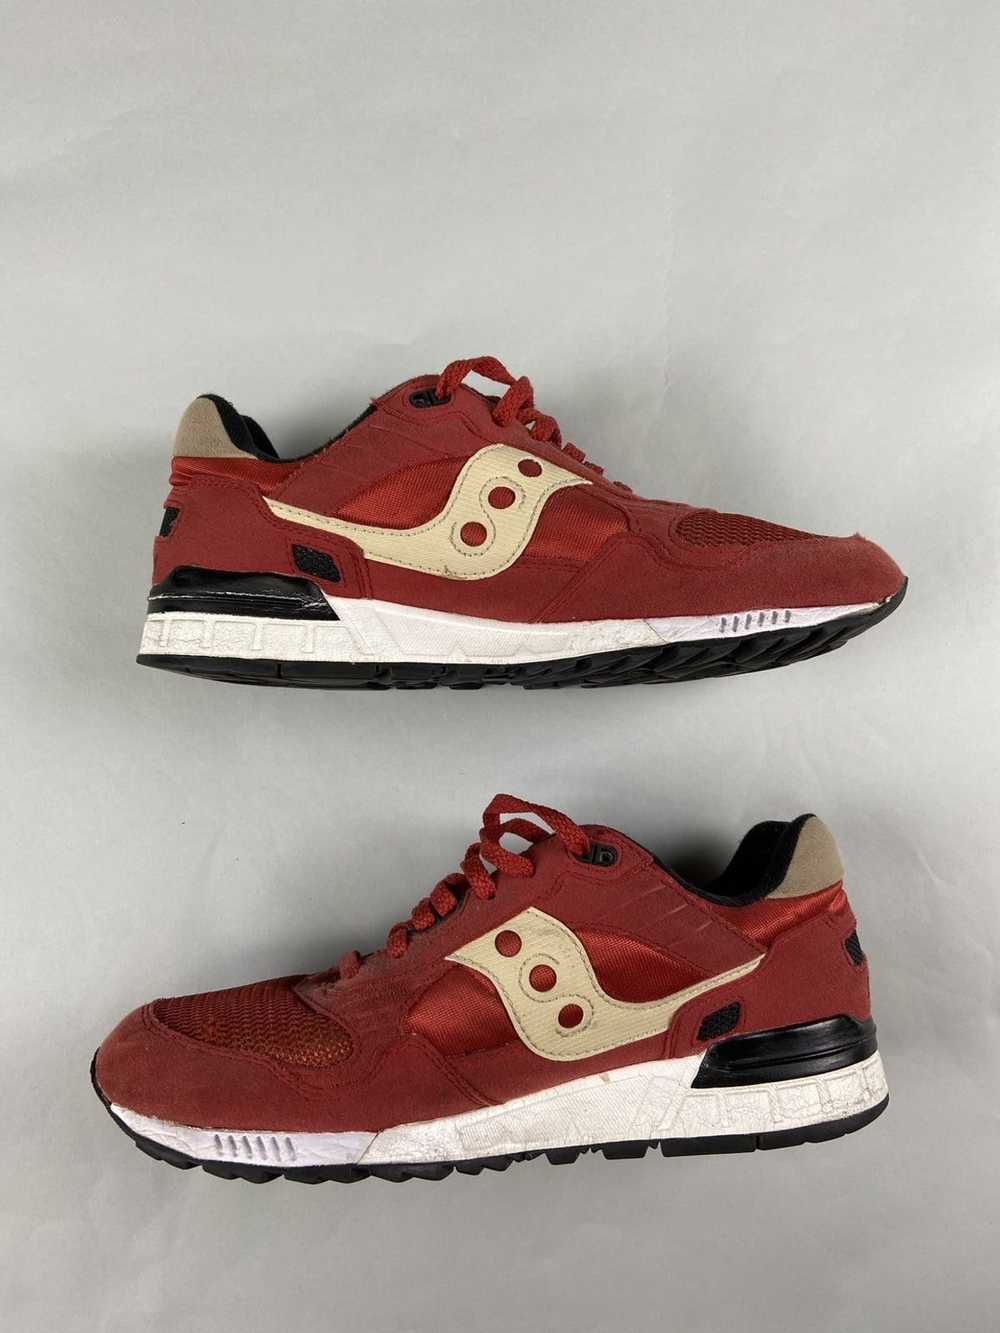 Saucony Saucony Shadow 5000 Vintage Running Shoes - image 3